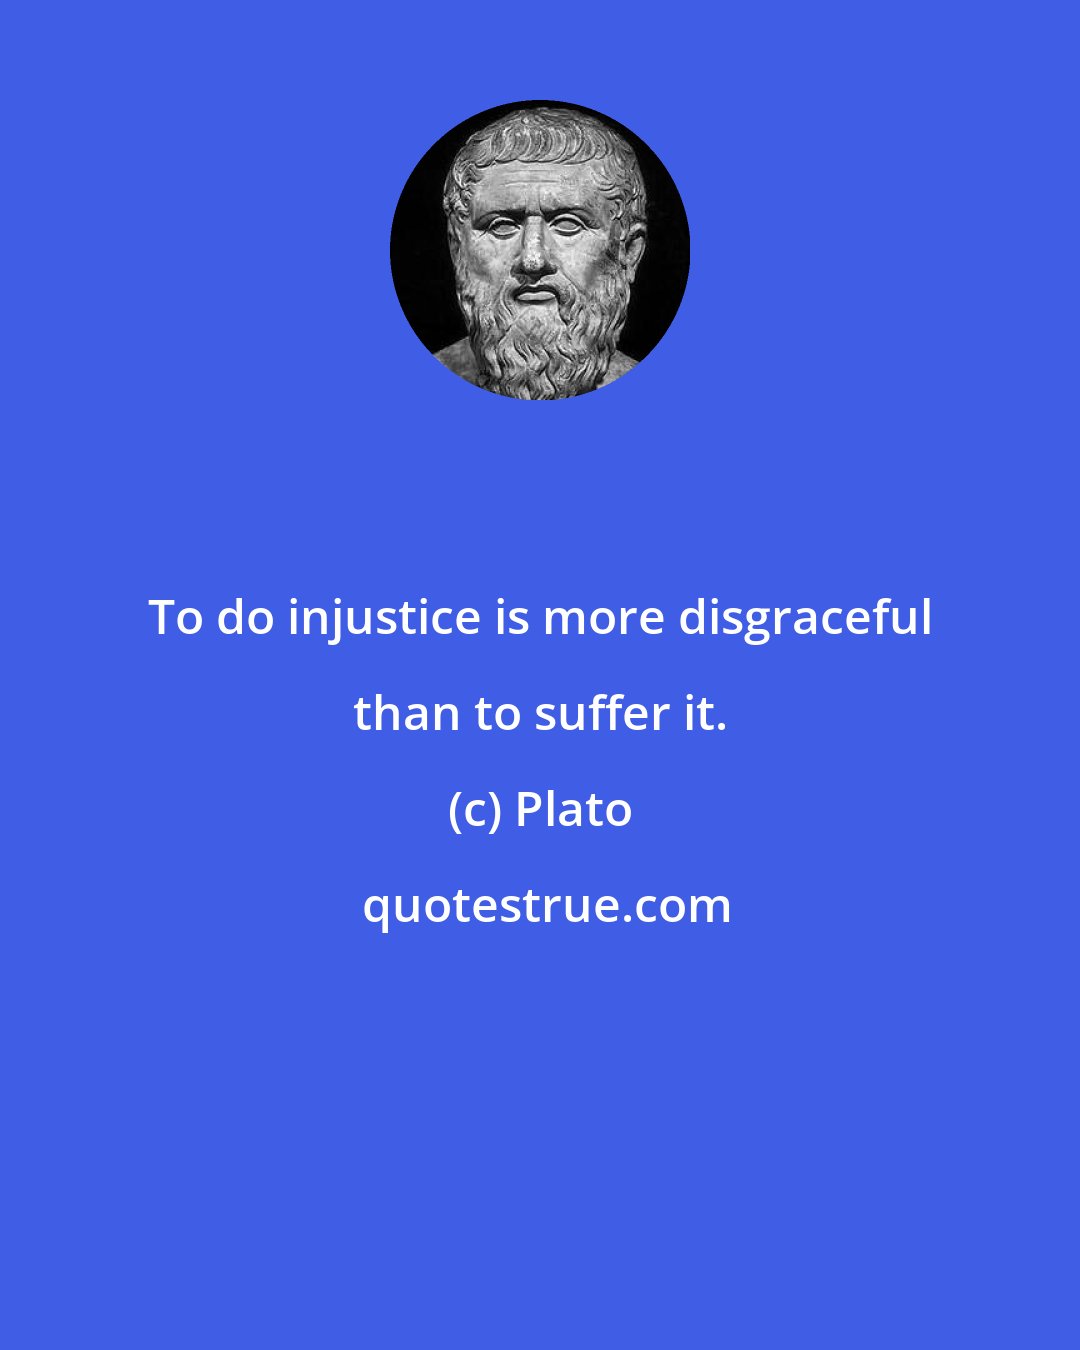 Plato: To do injustice is more disgraceful than to suffer it.